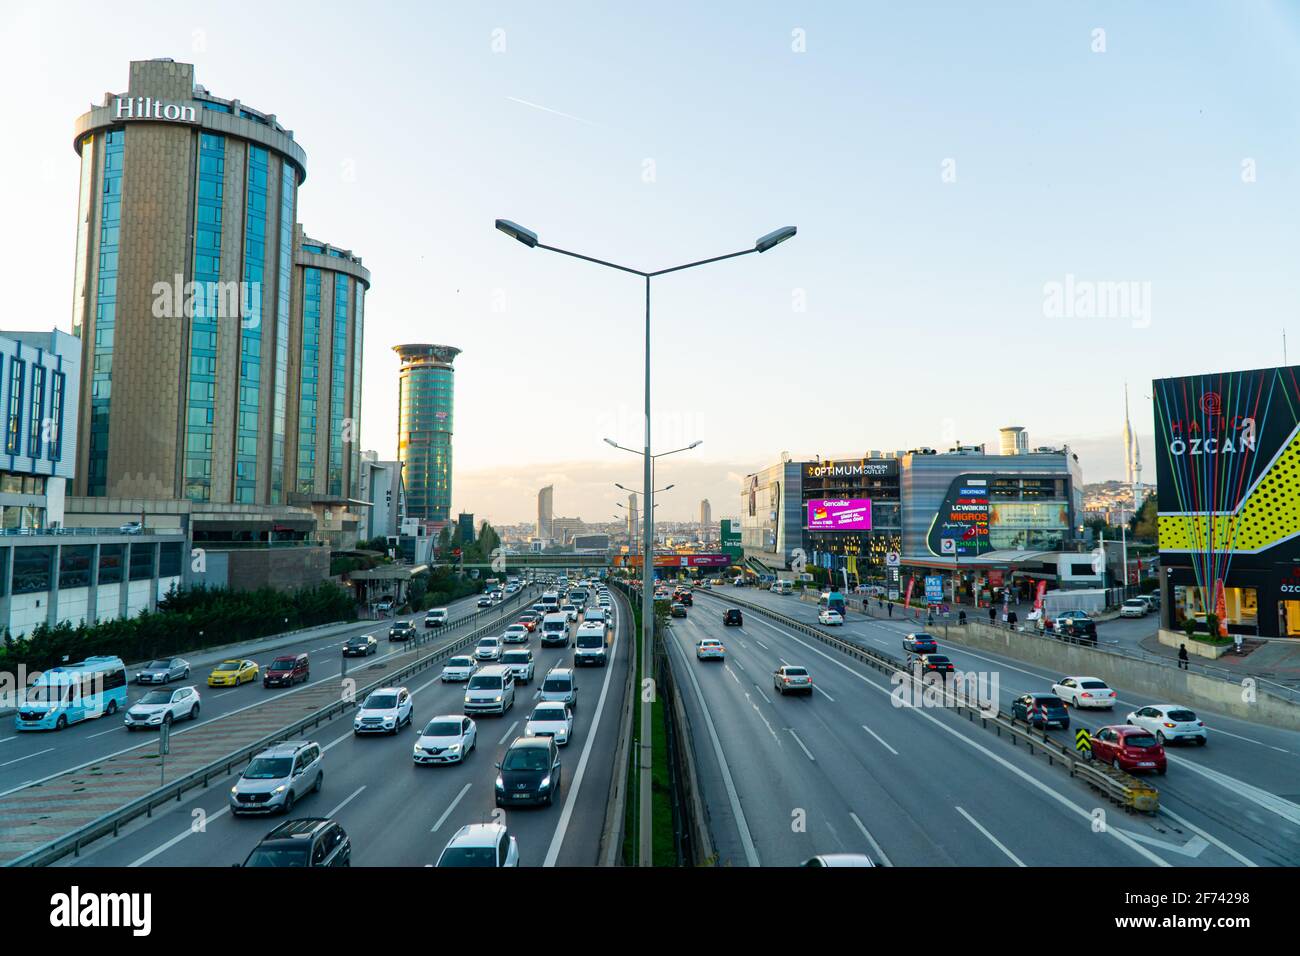 Istanbul traffic on highway and Optimum Mall Stock Photo